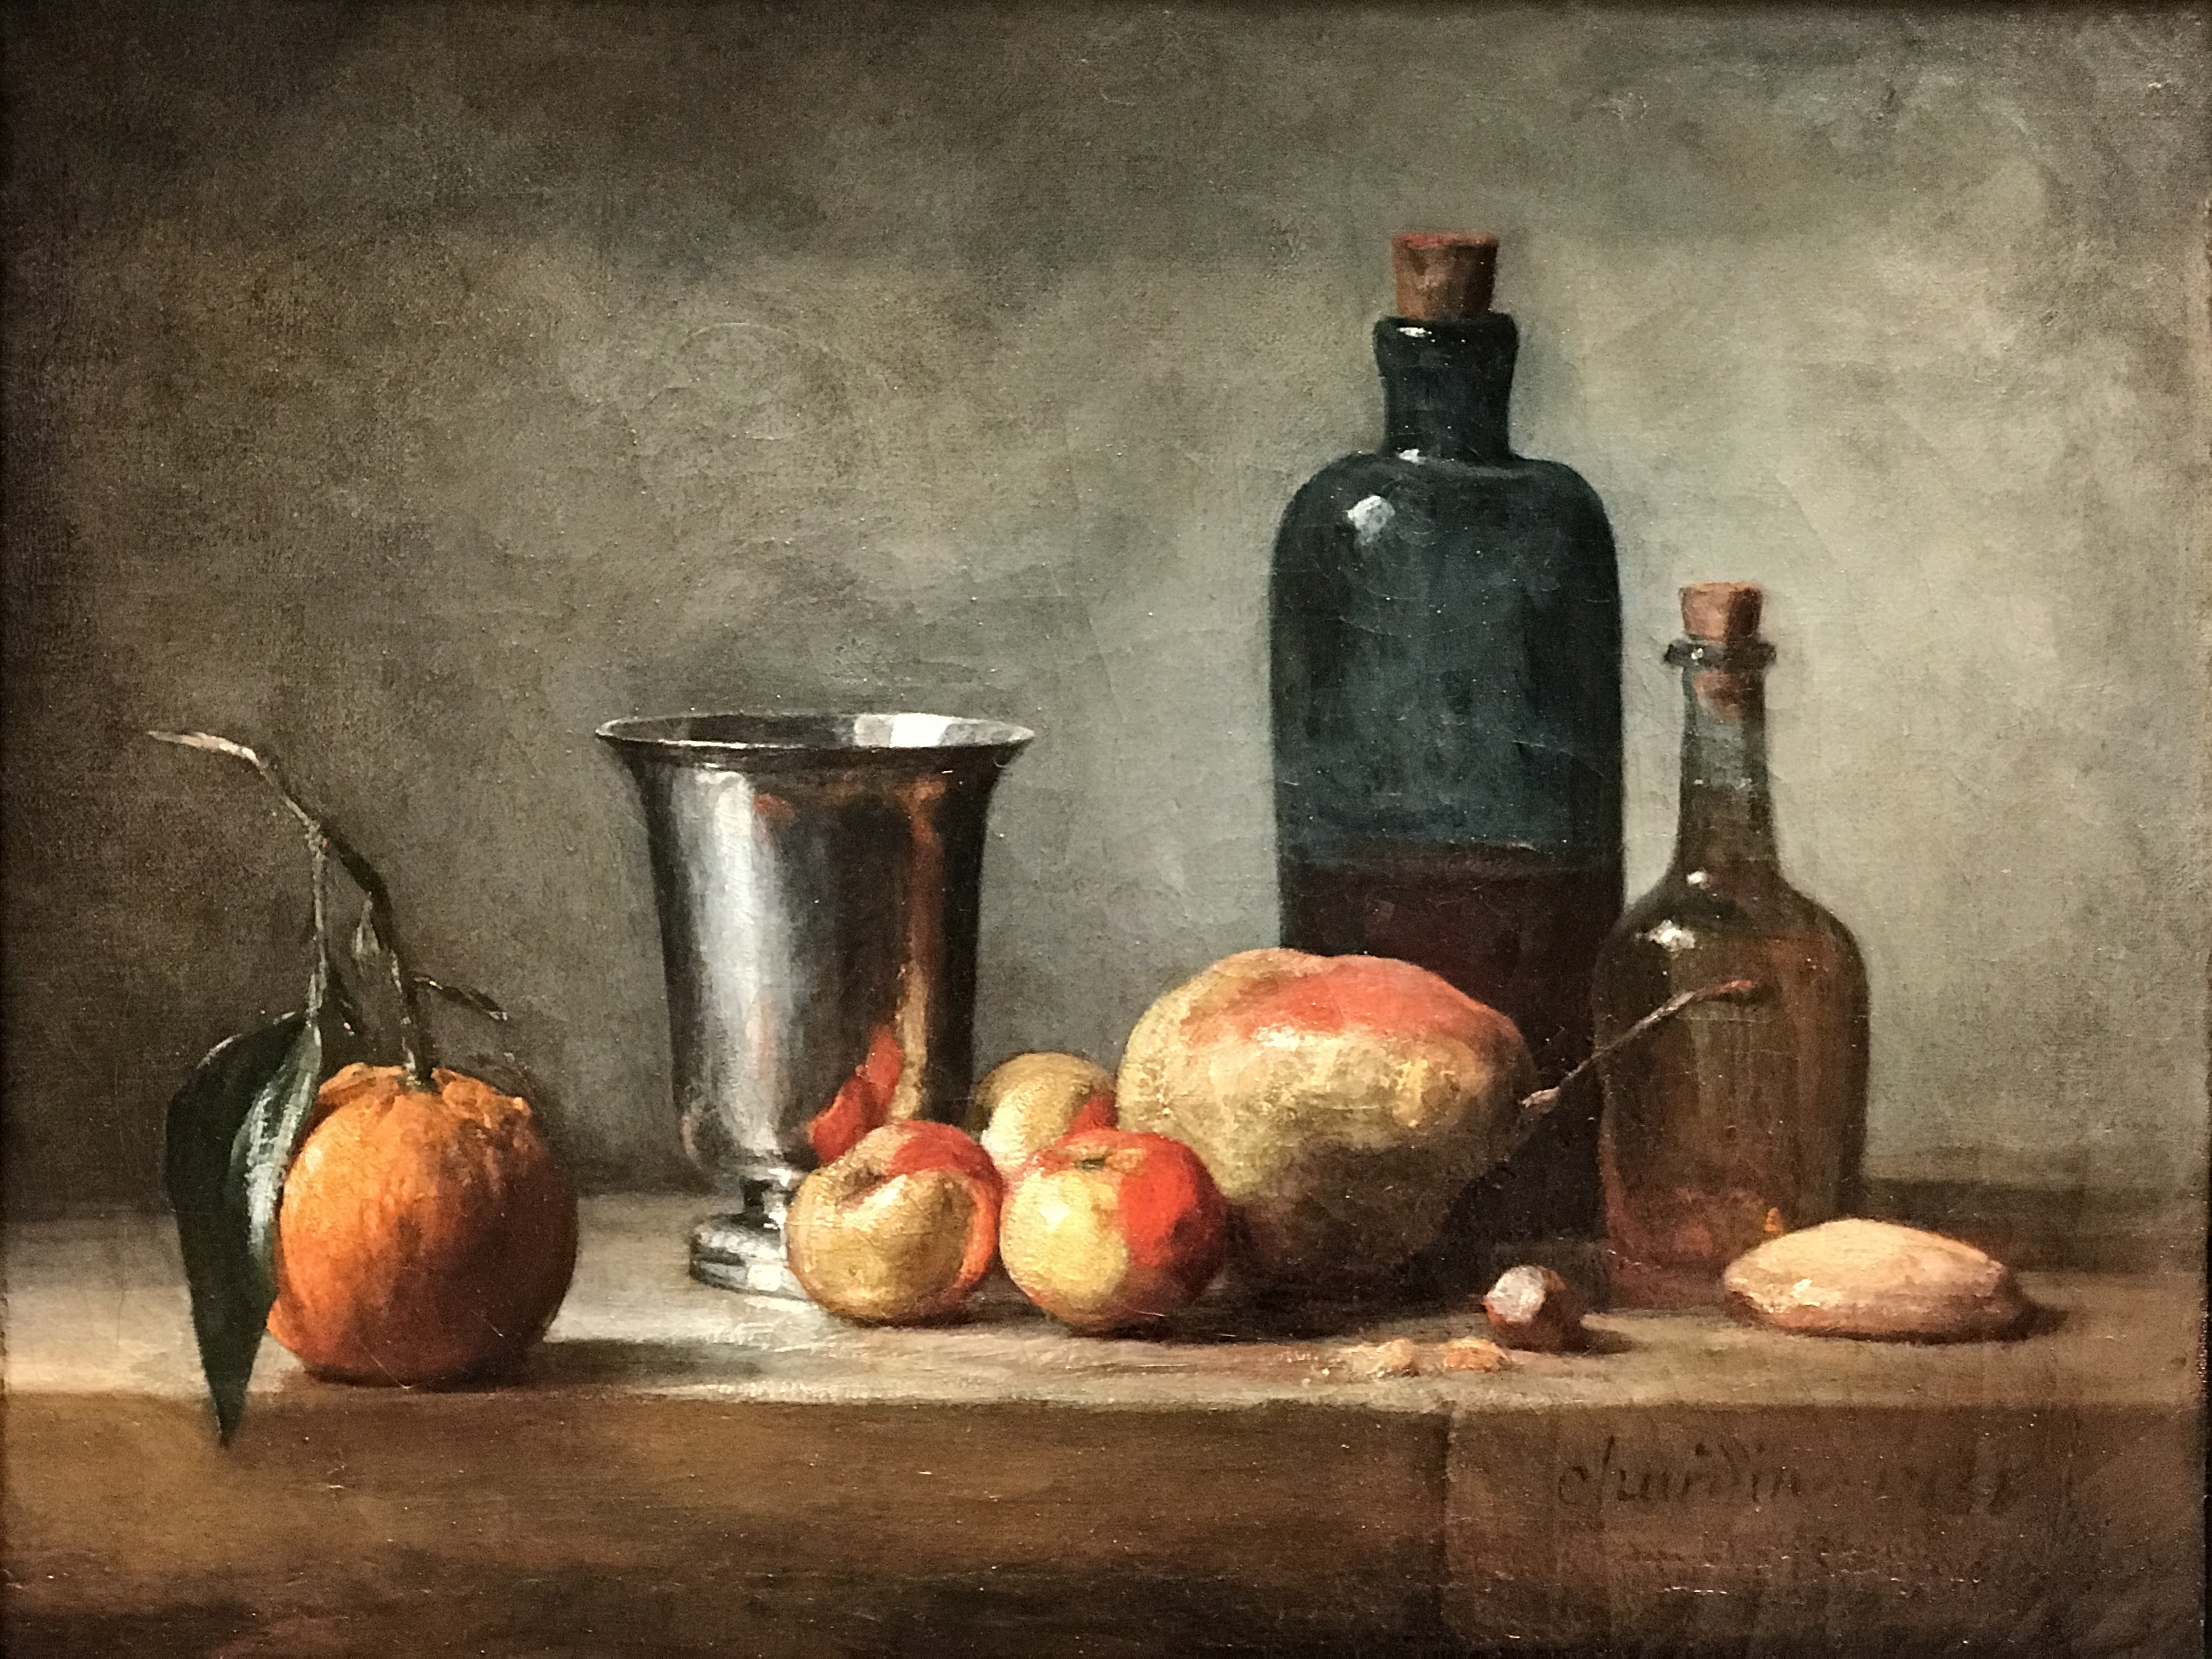 Seville Orange, Silver Goblet, Lady Apples, Pear, and Two Bottles, by Jean Siméon Chardin, my photo